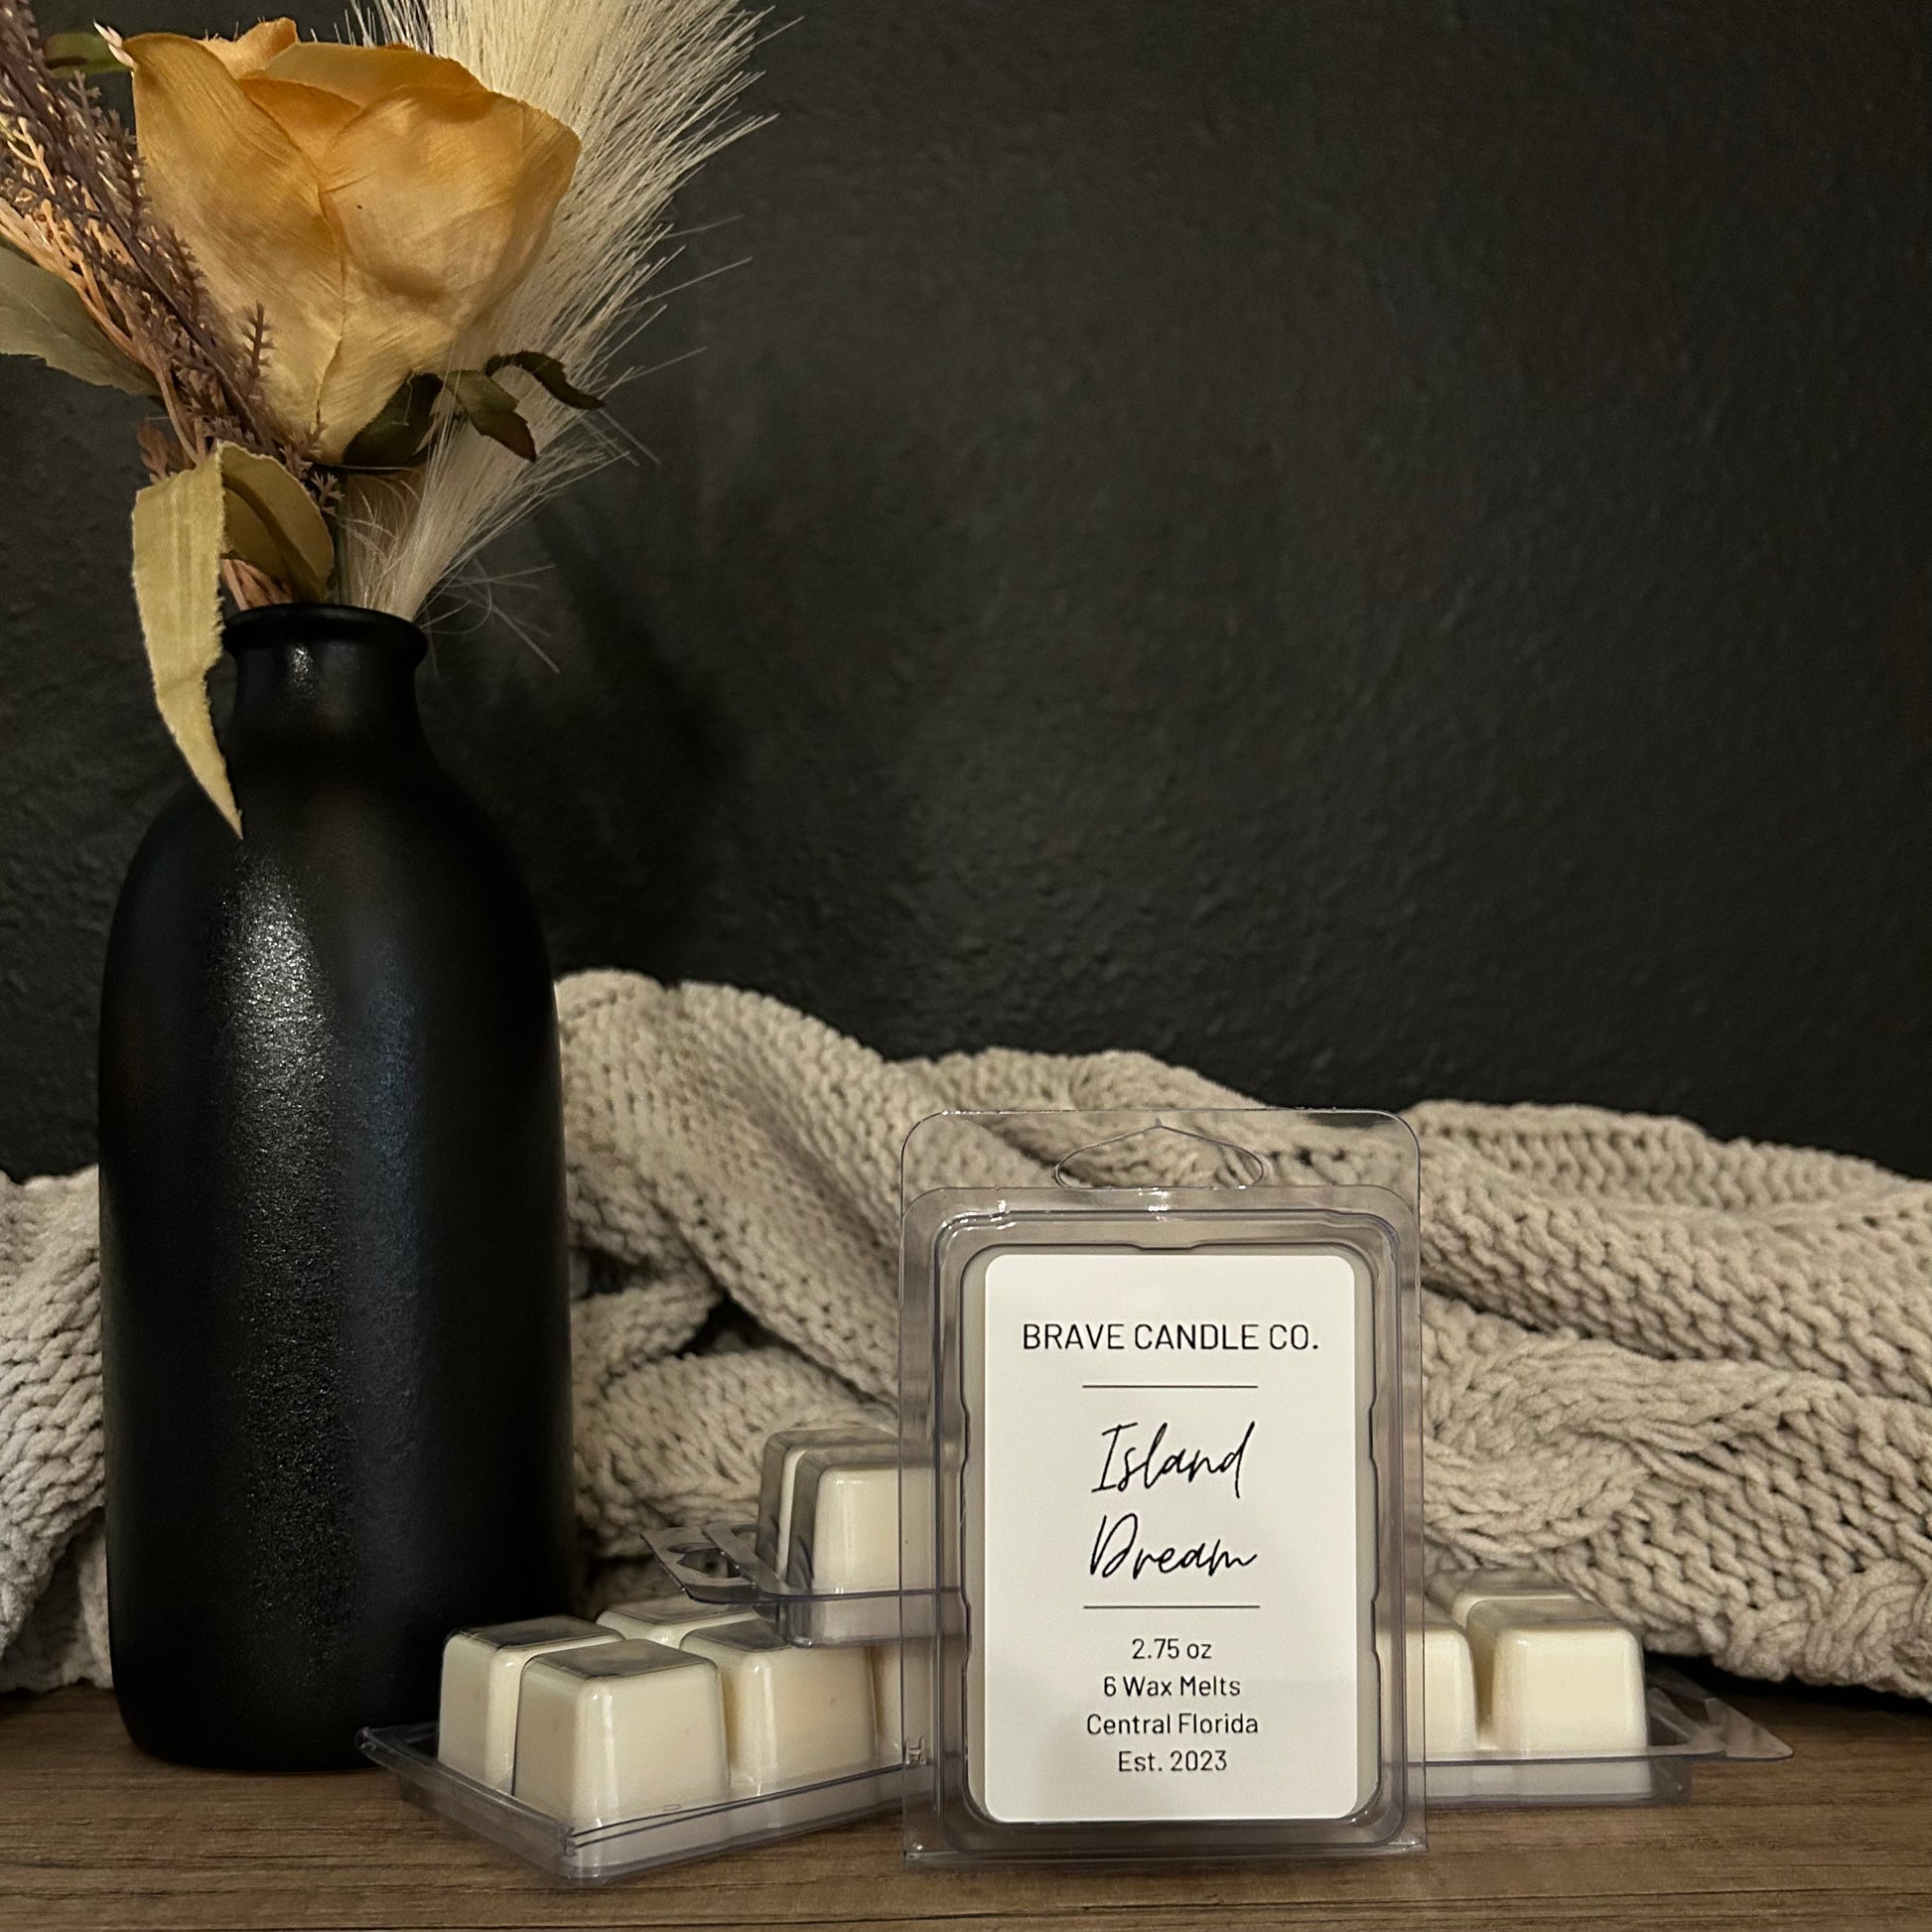 Island Dream Soy Wax Melt – Brave Candle Co.